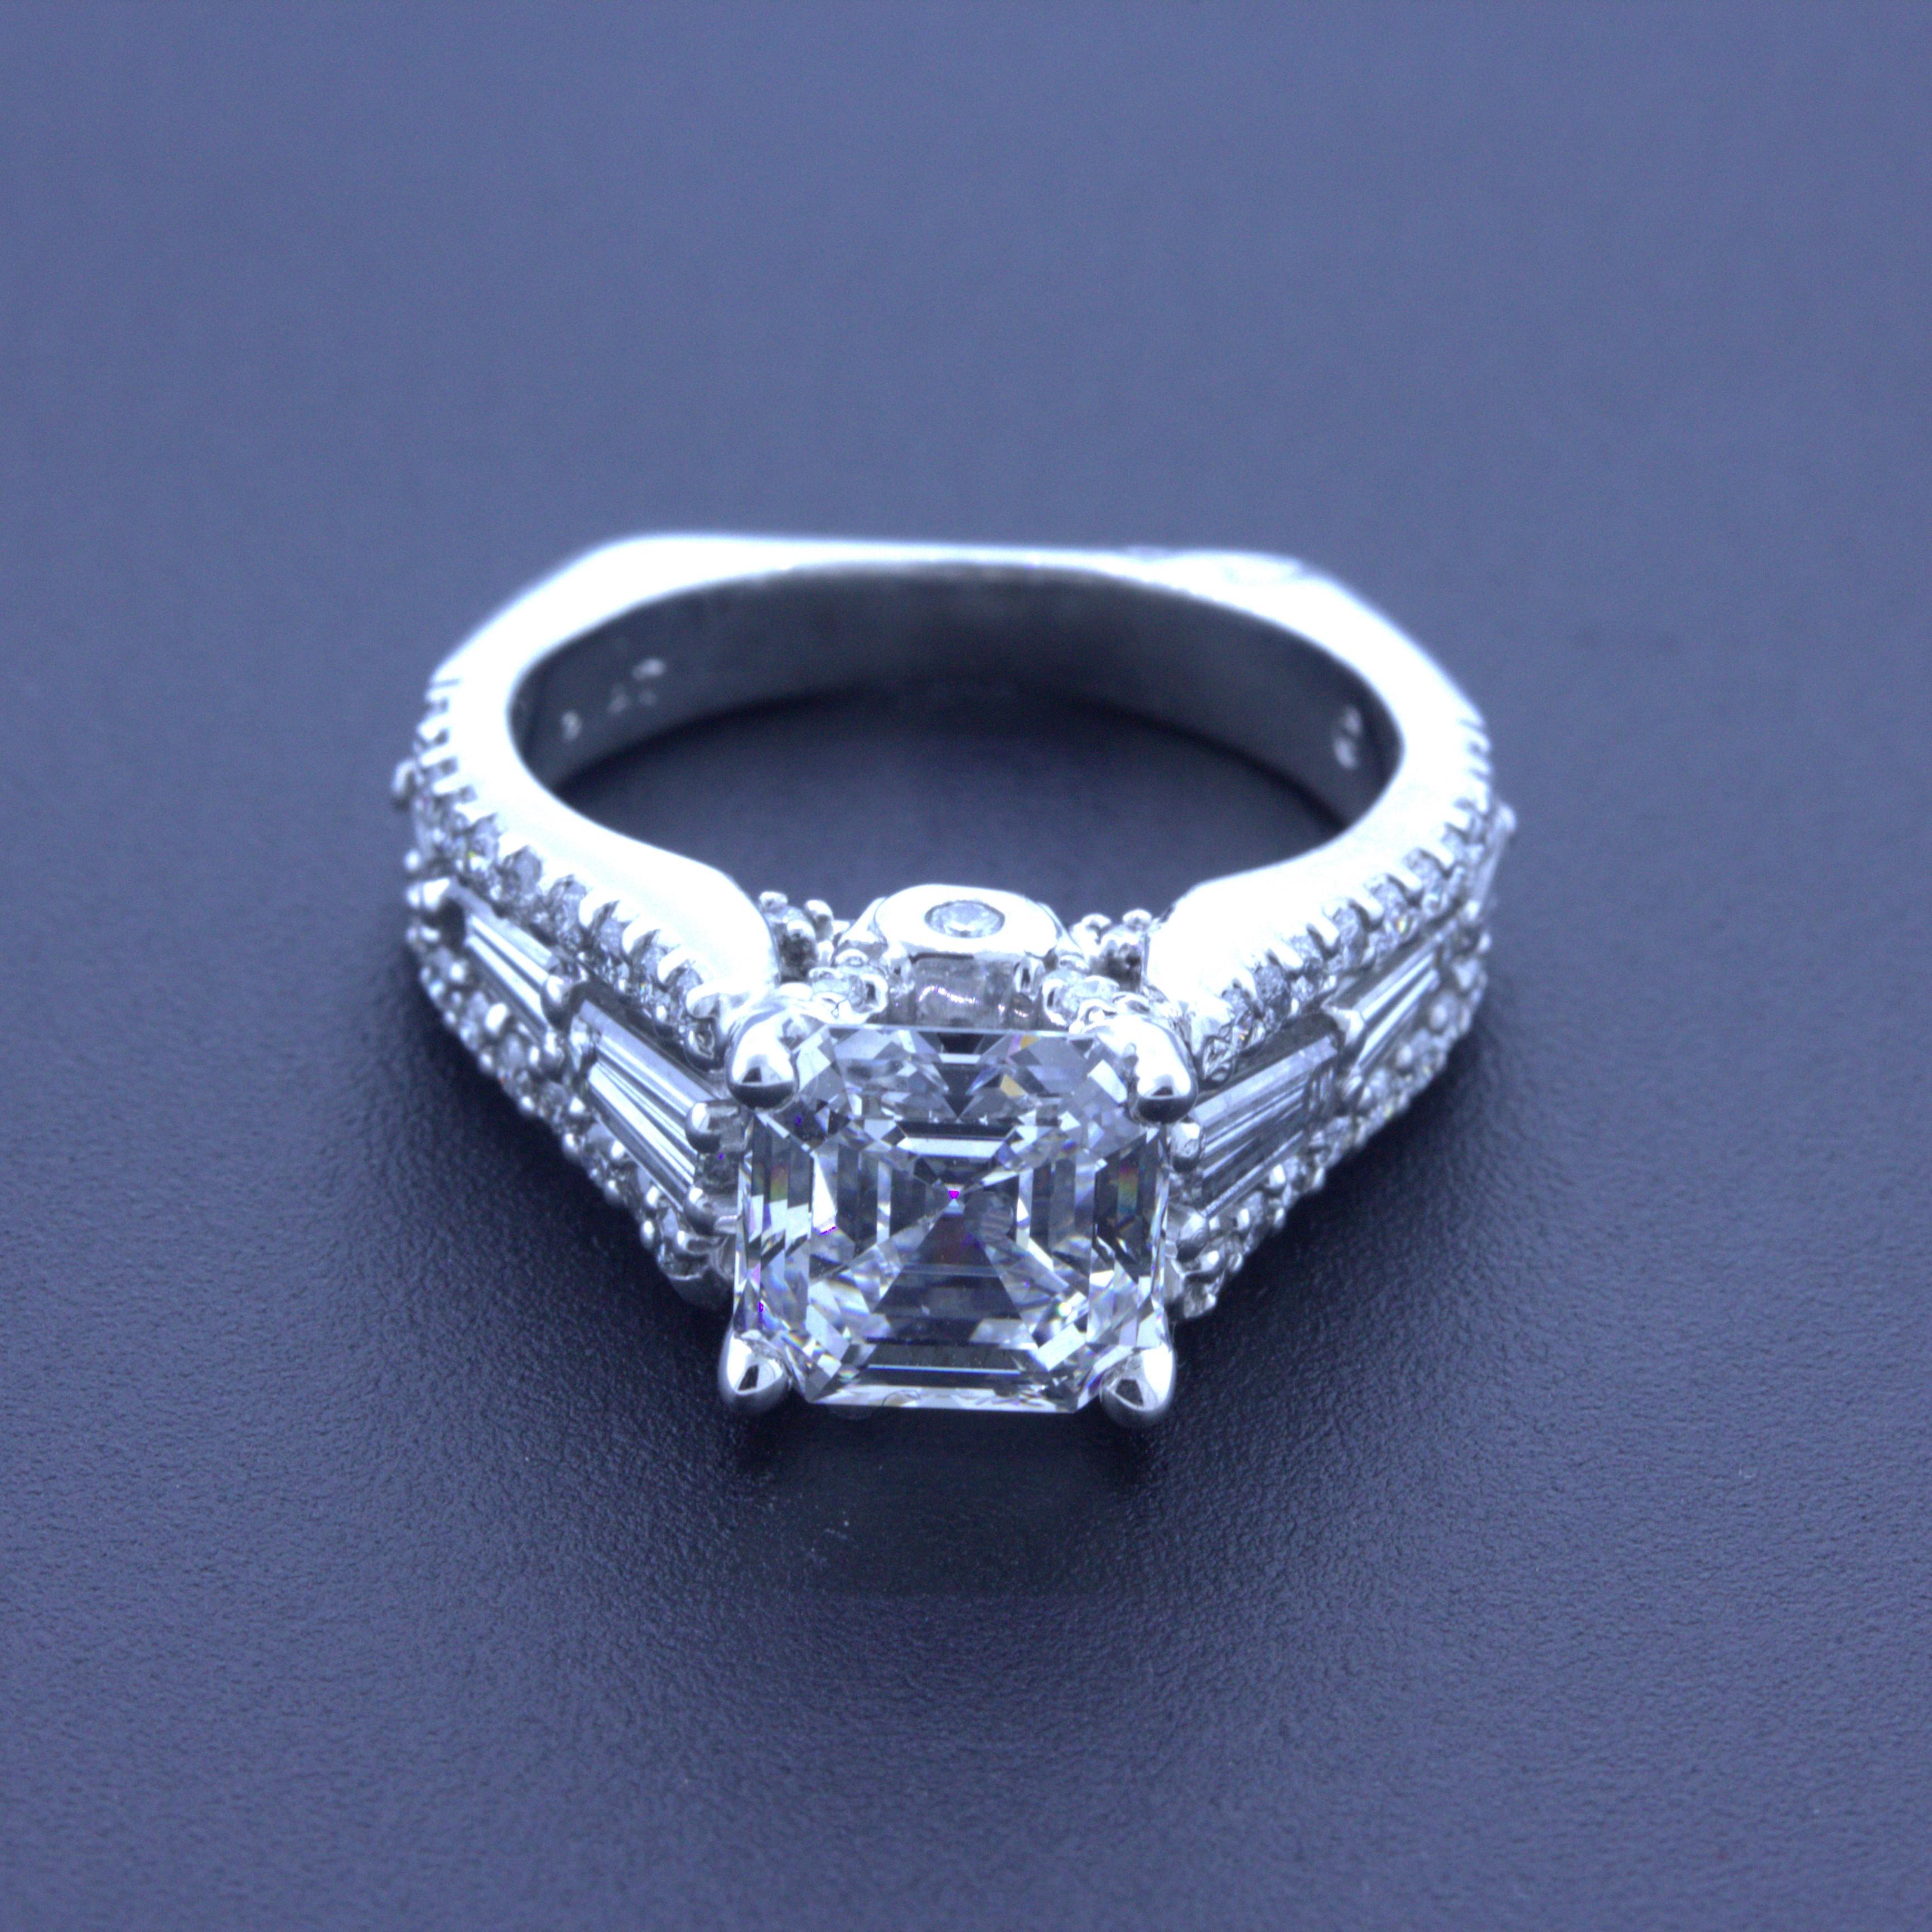 Say yes to this lovely platinum engagement ring featuring a very fine 2.19 carat Asscher-cut diamond. It has the top possible color grade of D along with strong clarity, VS2. The diamonds are bright white and pop with sparkle and brilliance. It is